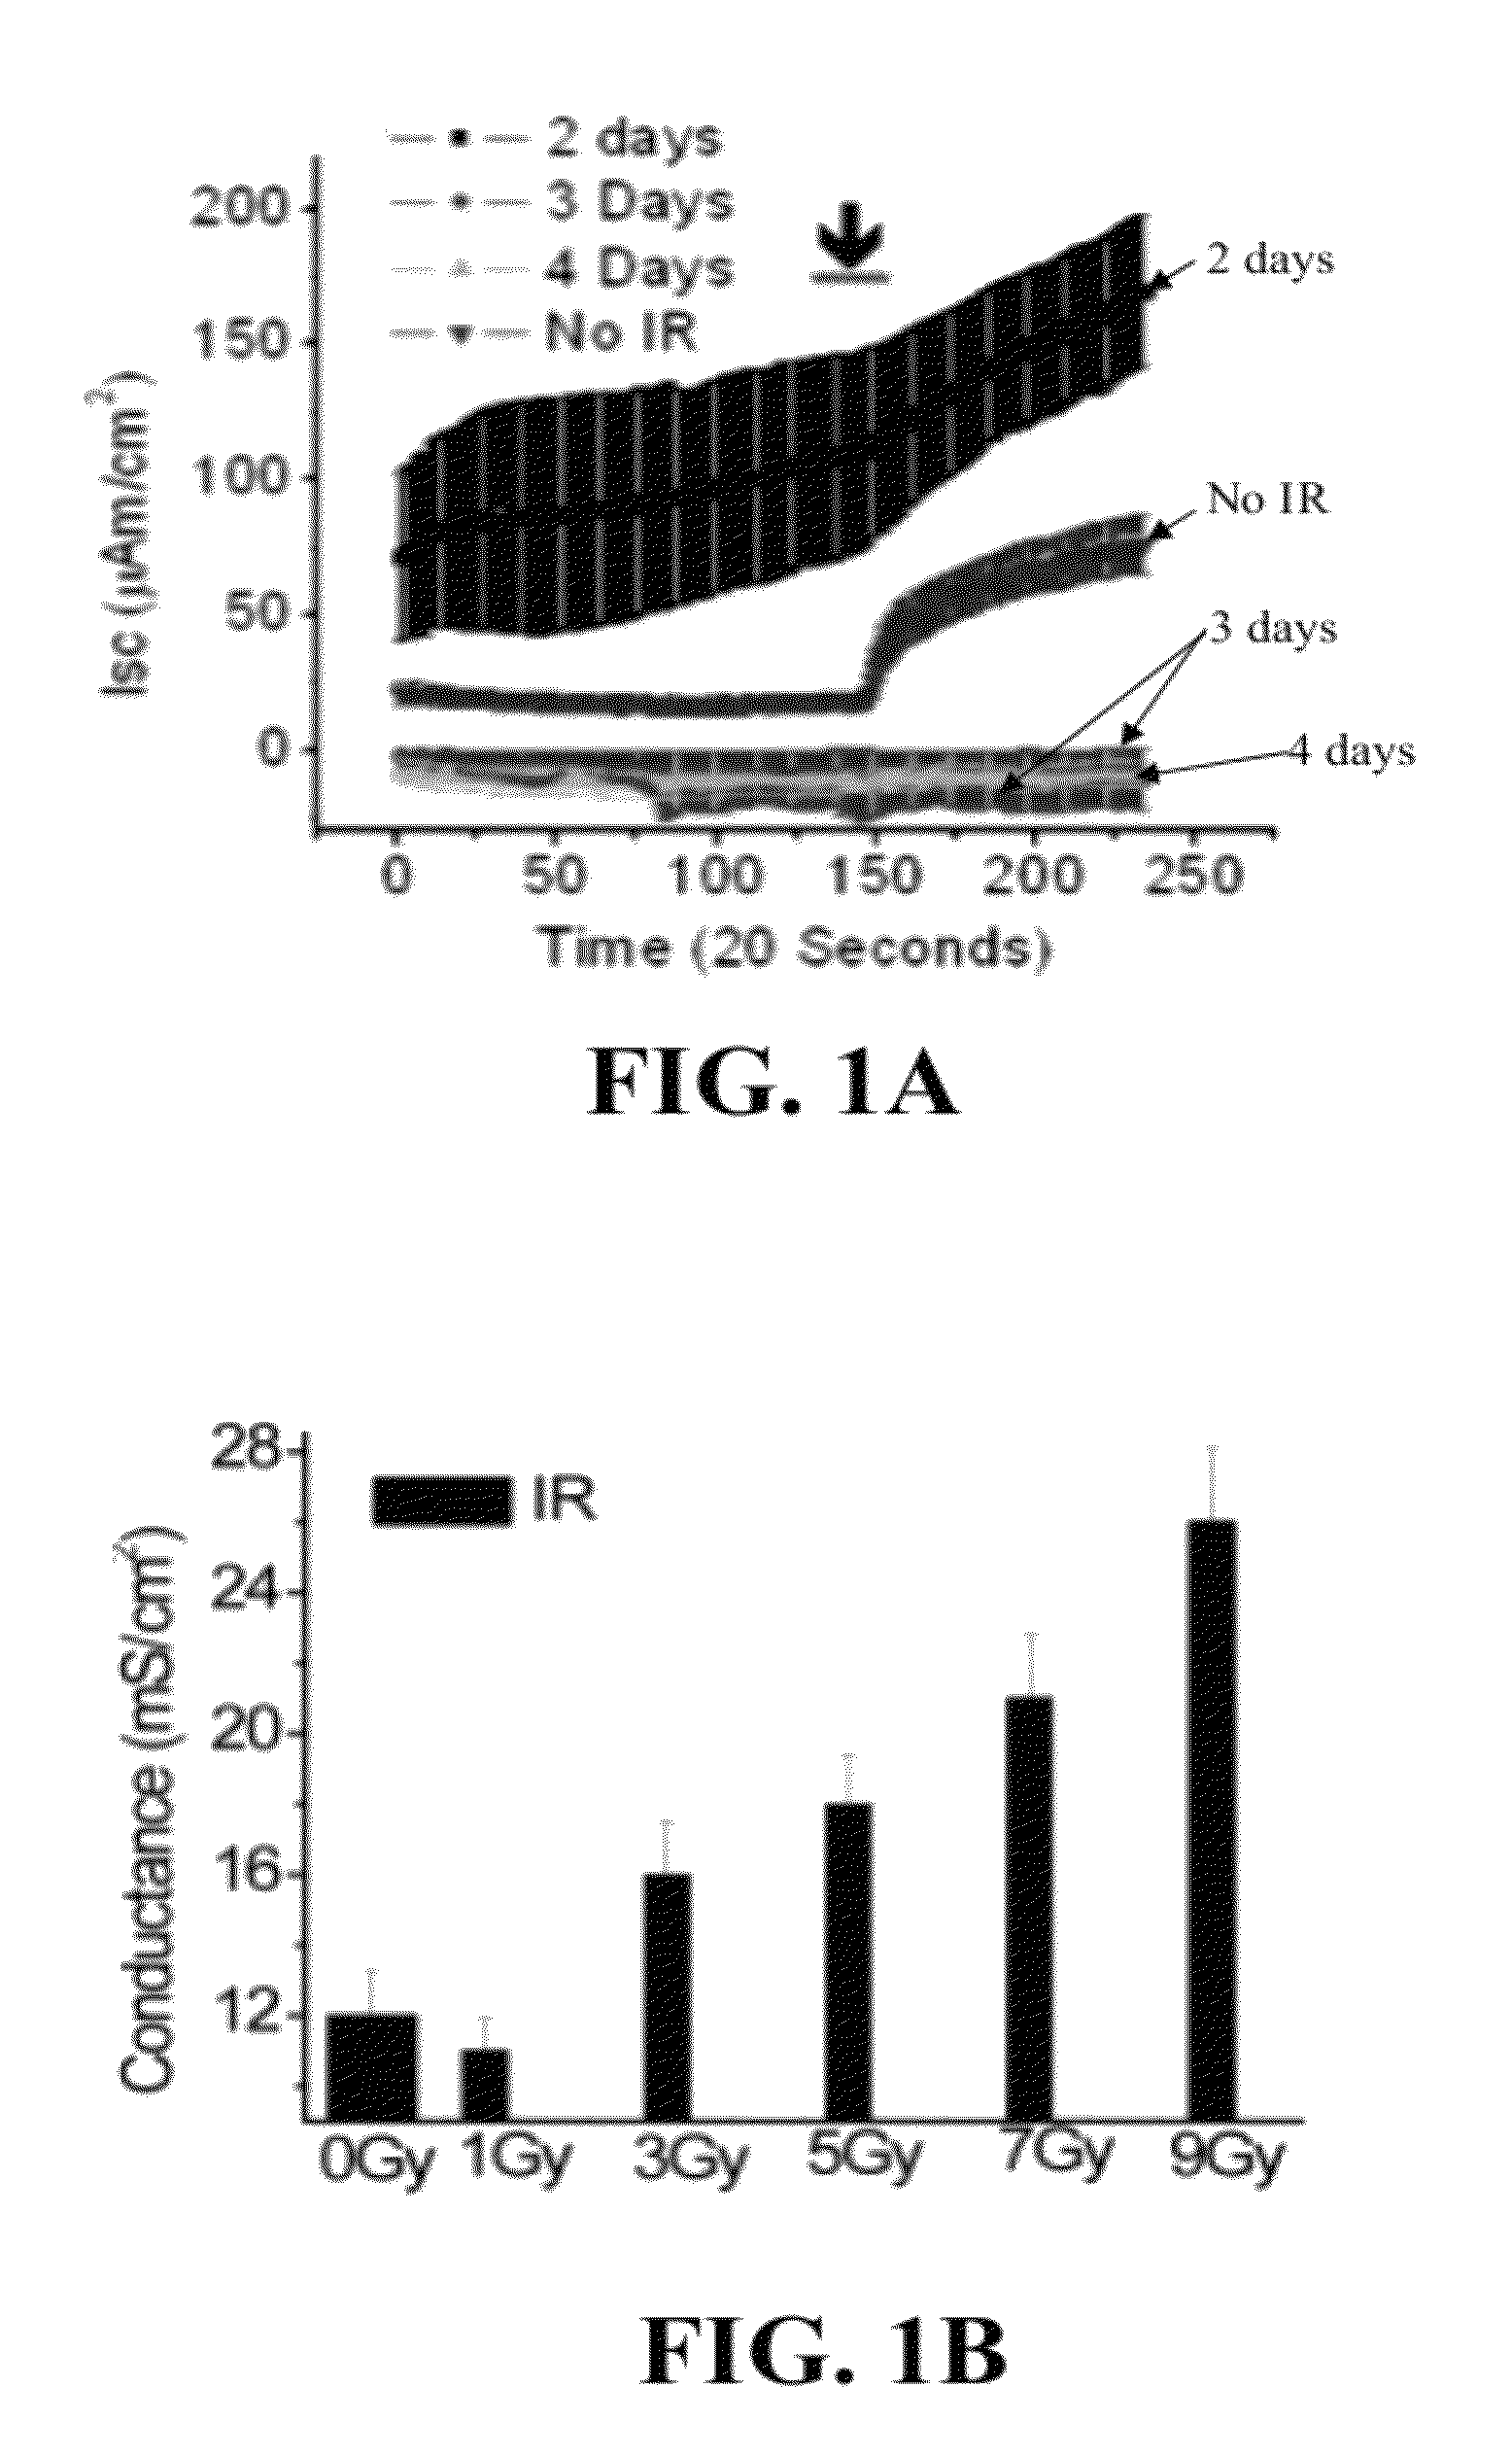 Materials and methods for improving gastrointestinal function